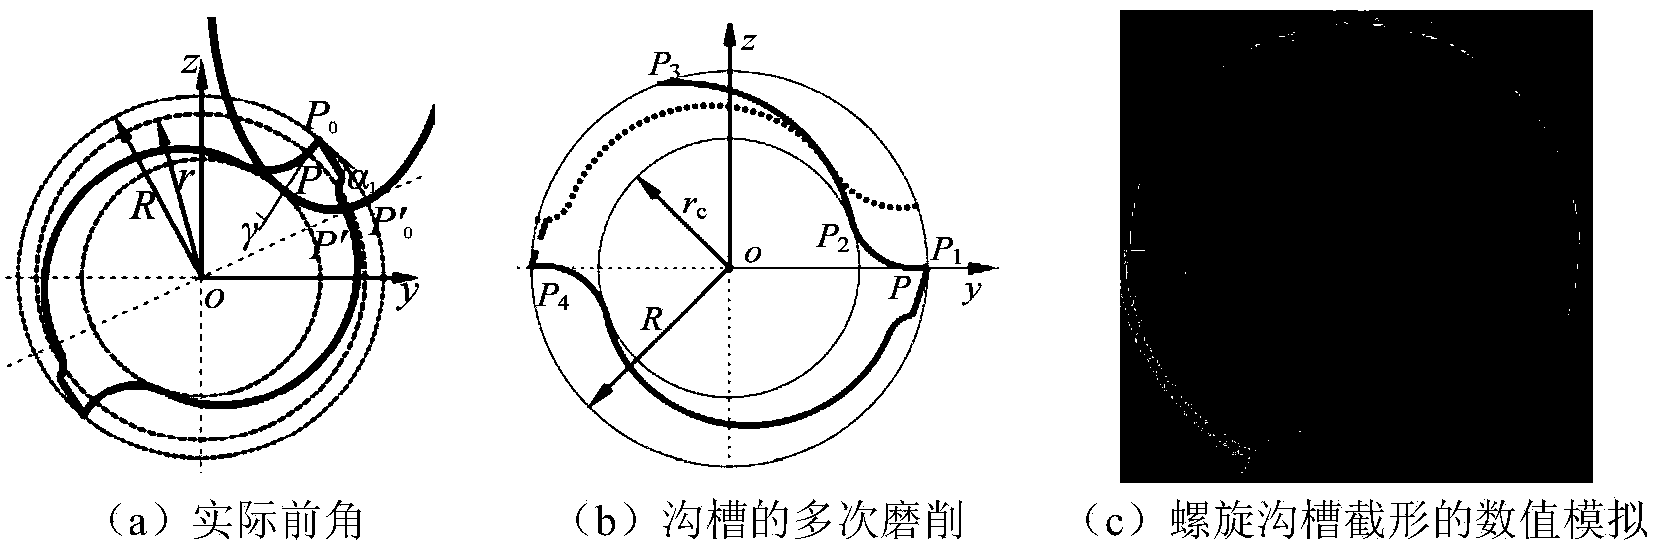 Non-instantaneous-pole envelope grinding method of spiral curved surface of superfine milling cutter